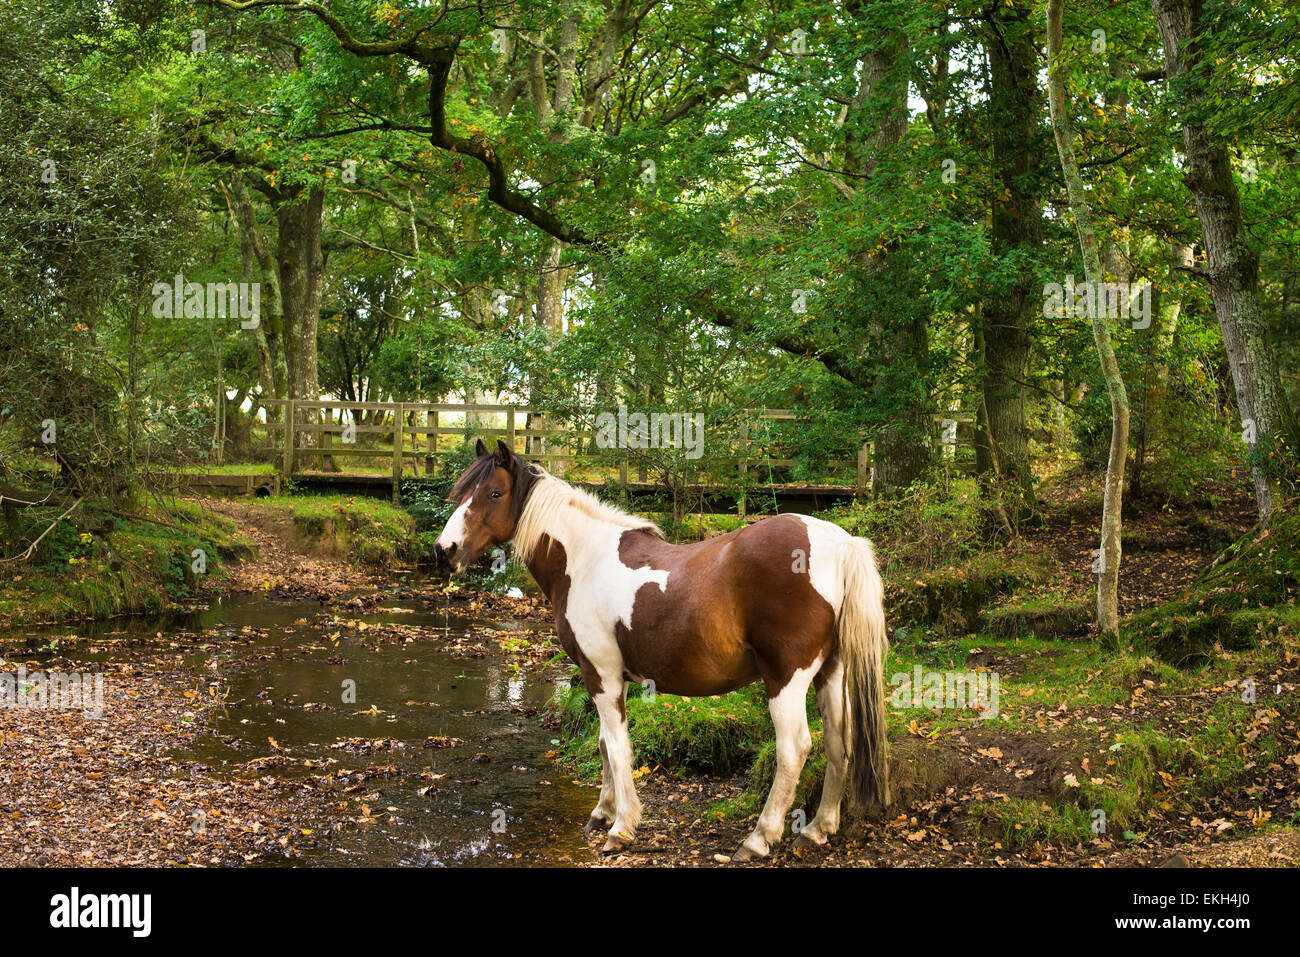 Skewbald New Forest pony by a small stream in a shady green glade Stock Photo